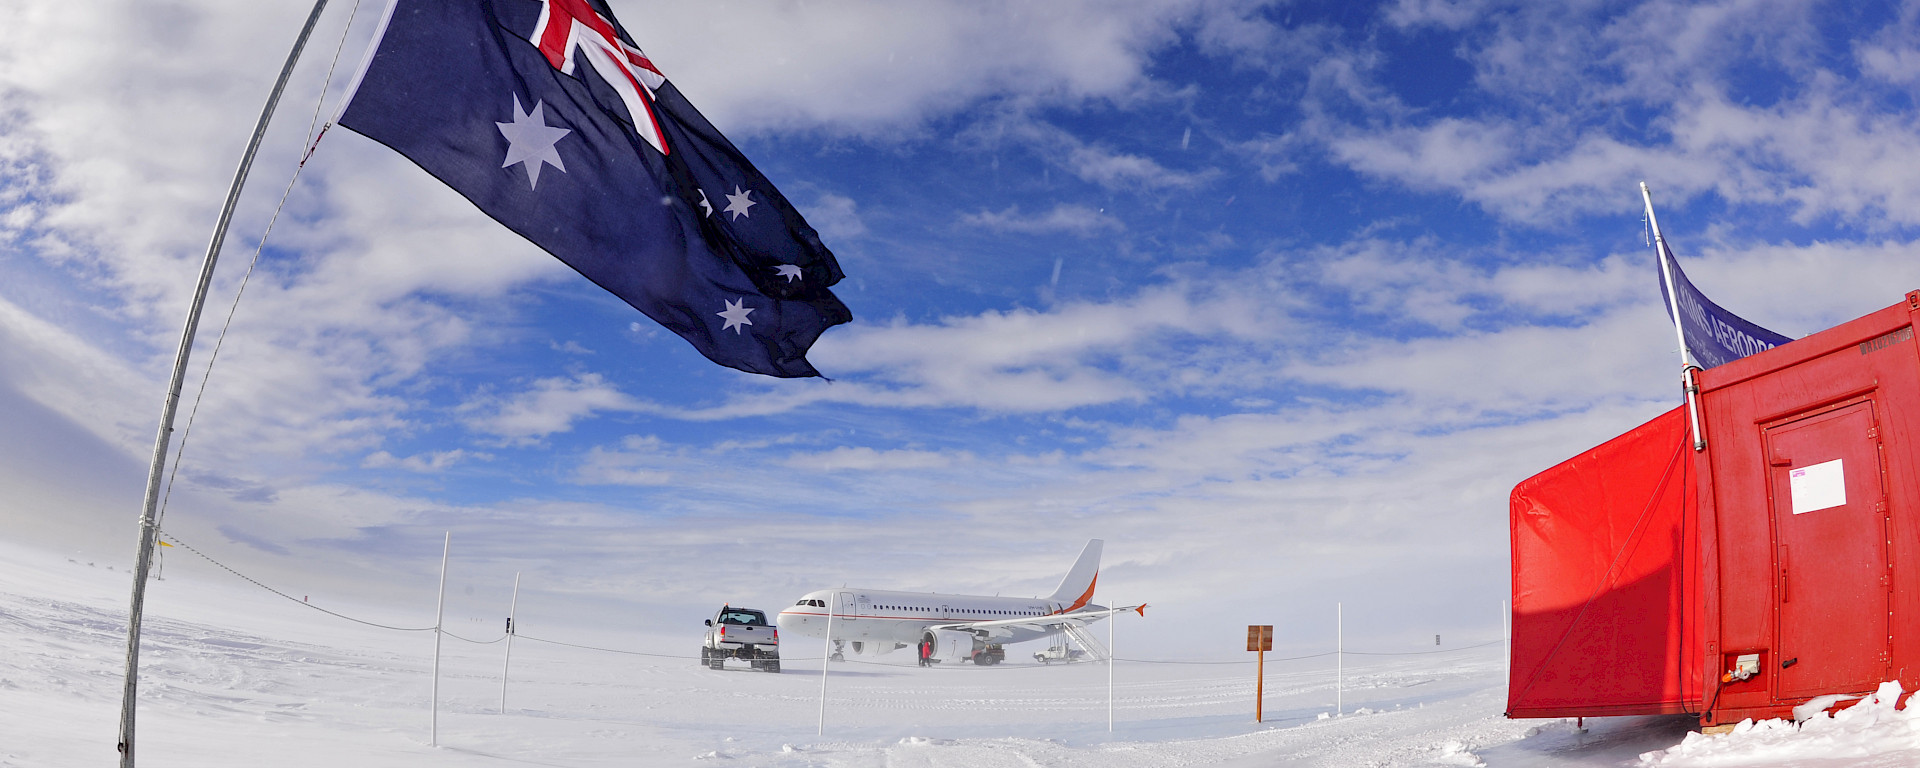 Australian flag flying with aircraft in distance.